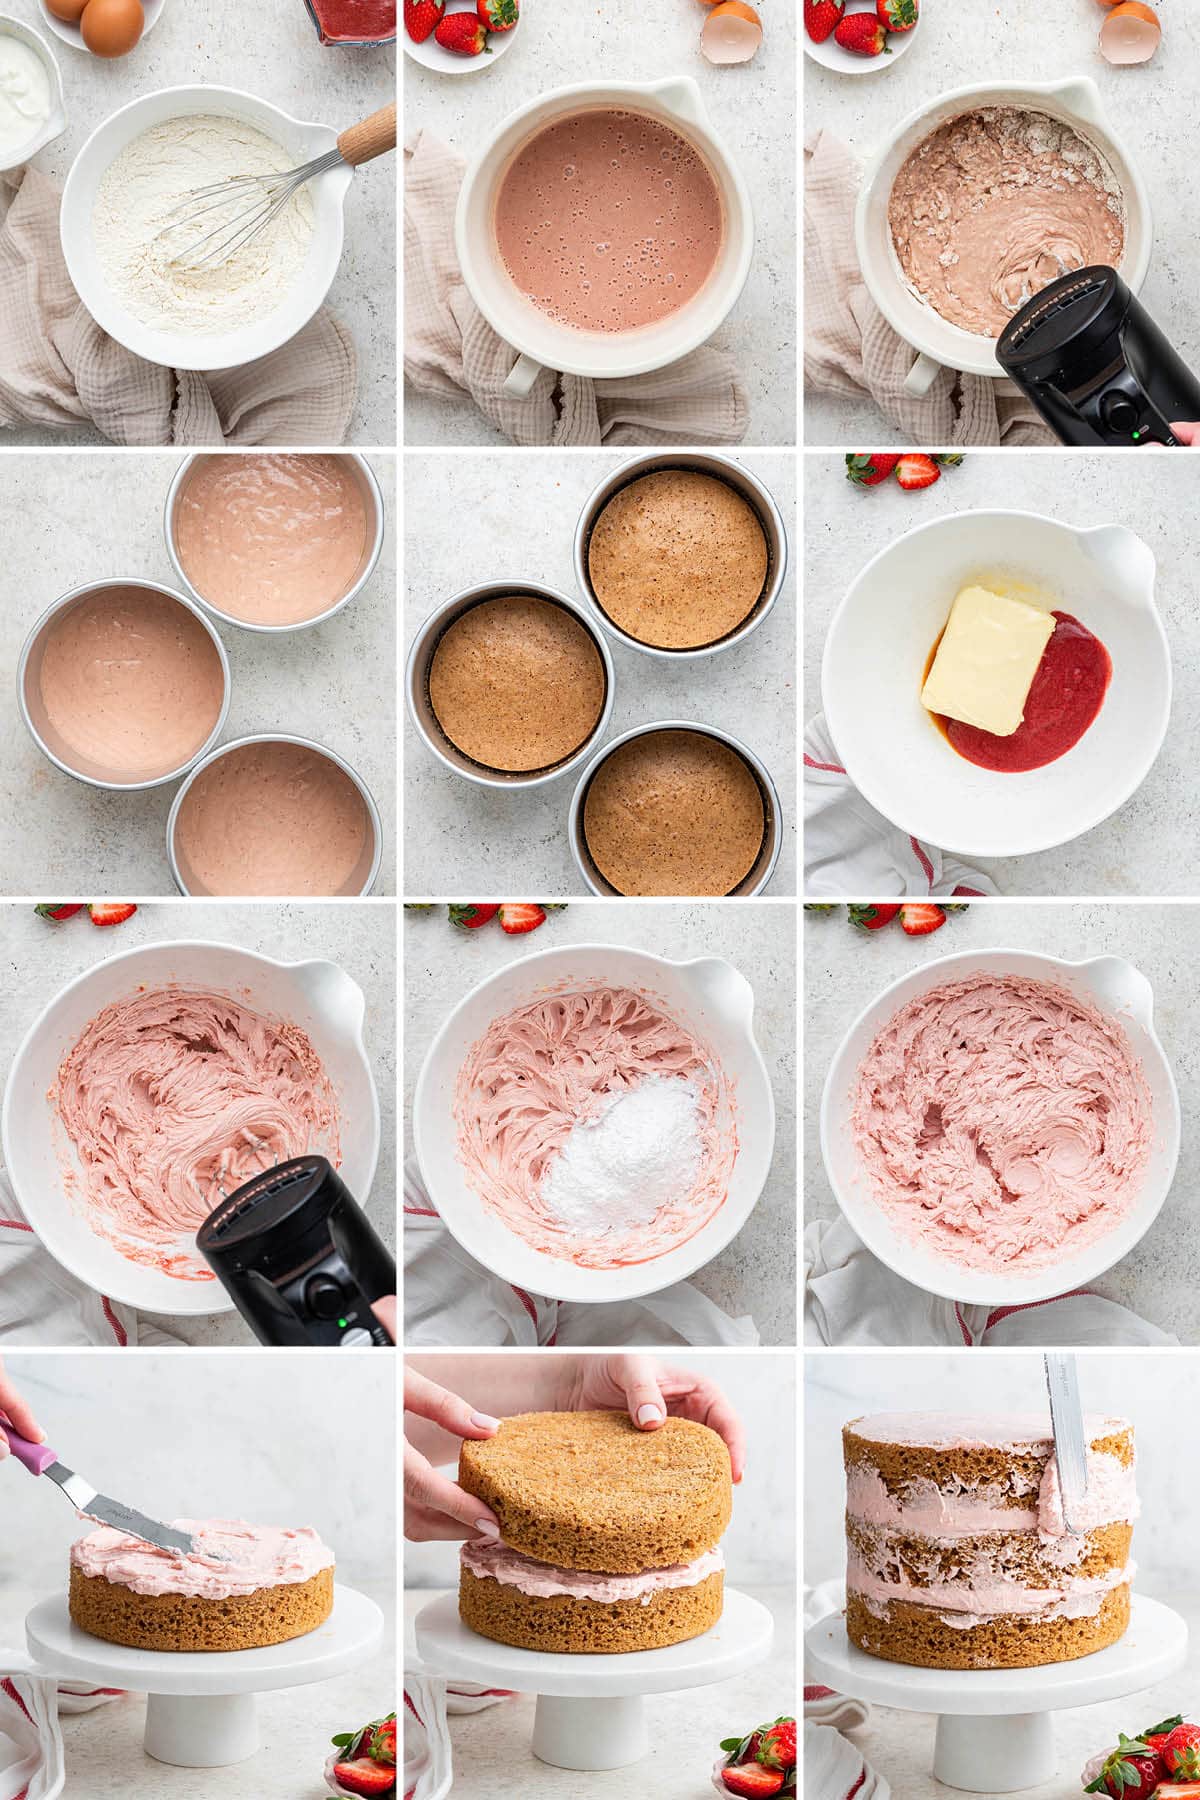 Collage of 12 photos showing the steps to make a Healthy Strawberry Cake: making the batter, baking in three cake tins, making strawberry frosting, and then frosting and layering the cake.